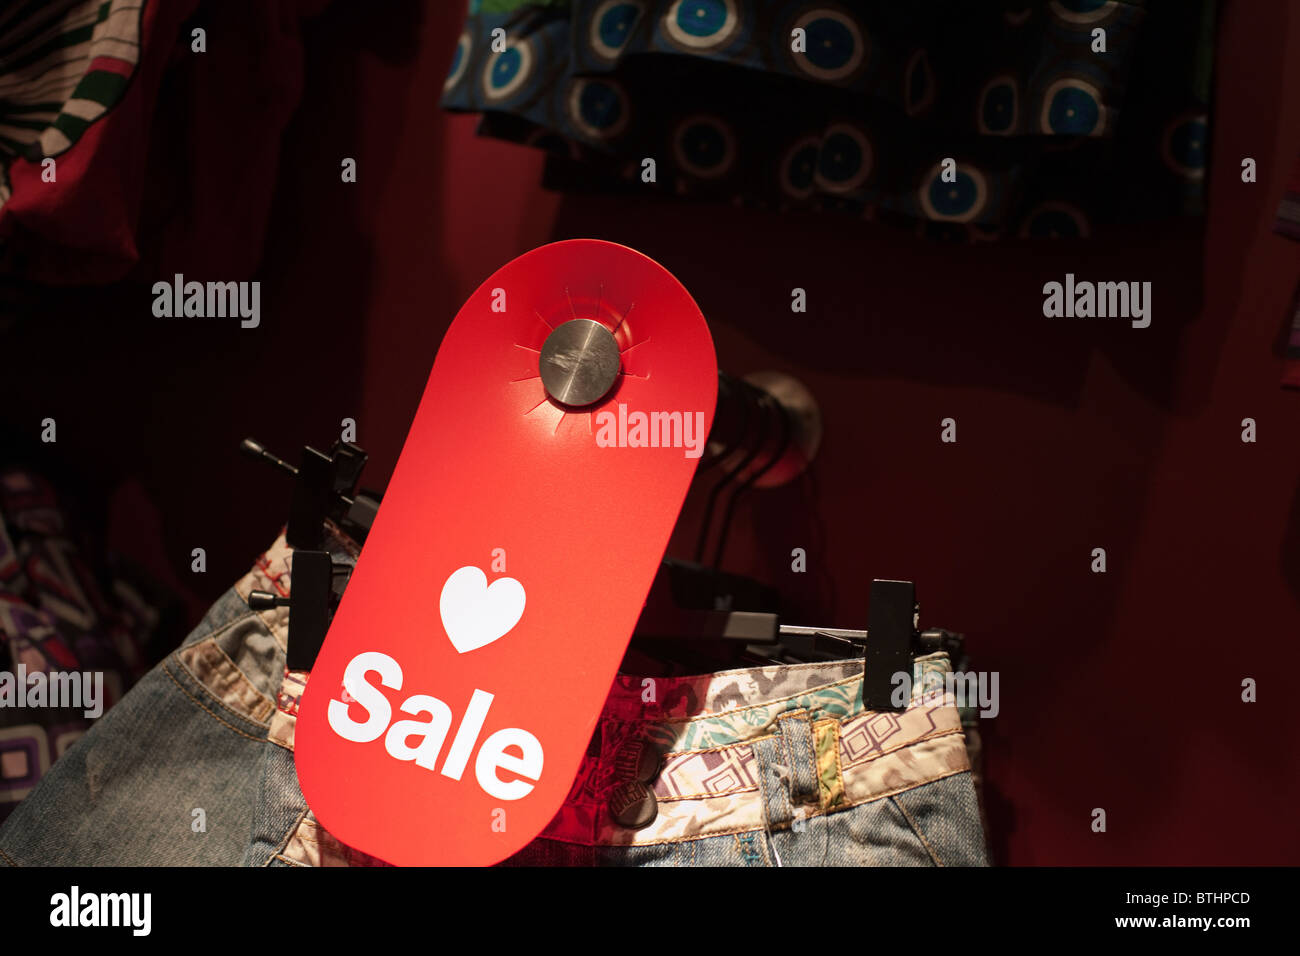 A sale sign in a clothing store in New York on Saturday, October 30, 2010. (© Richard B. Levine) Stock Photo